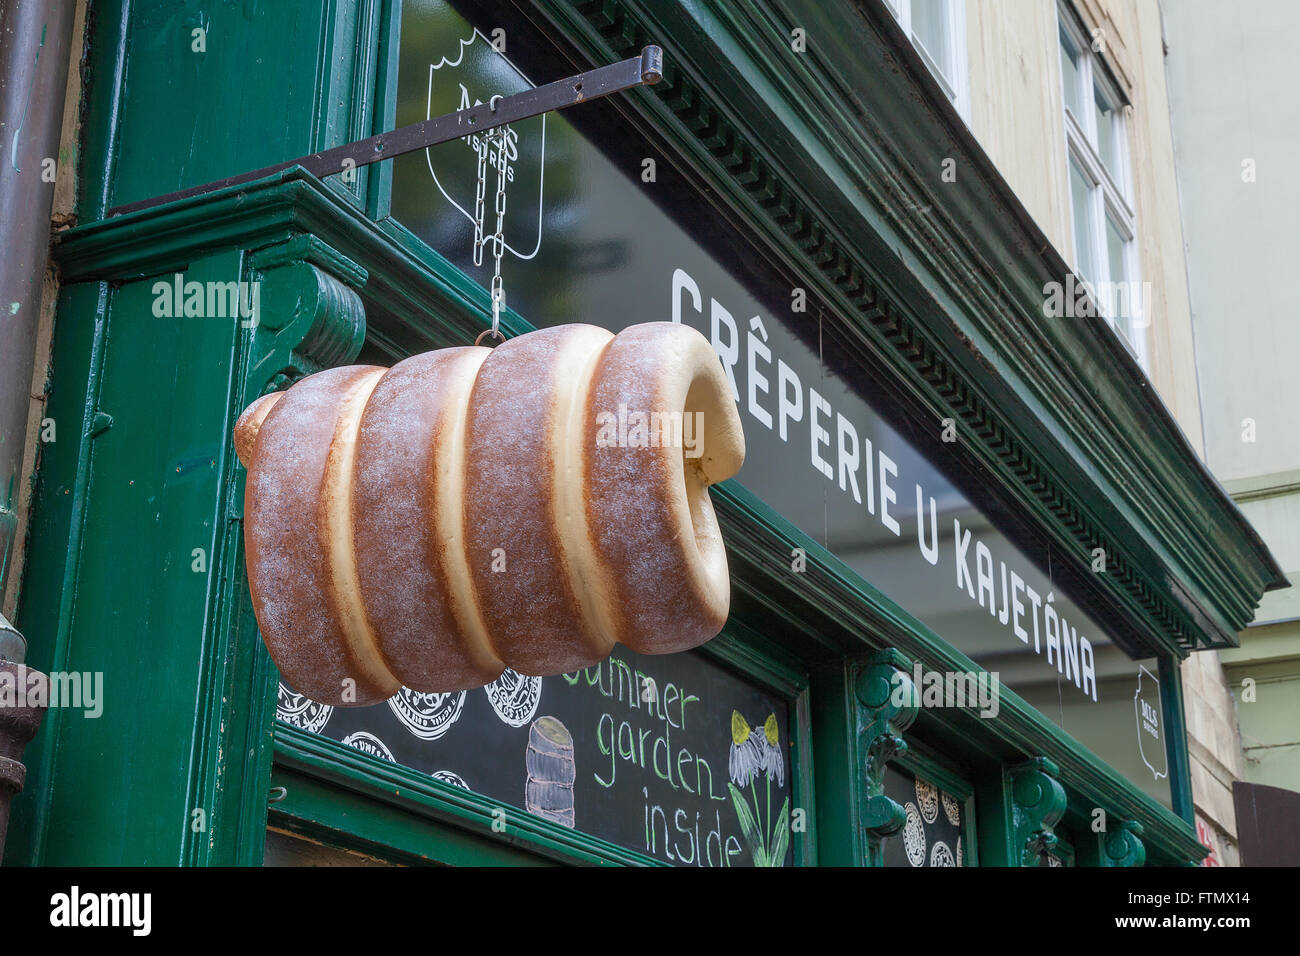 Traditional pastry shop selling Trdelnik the traditional Czech cinnamon pastry Stock Photo